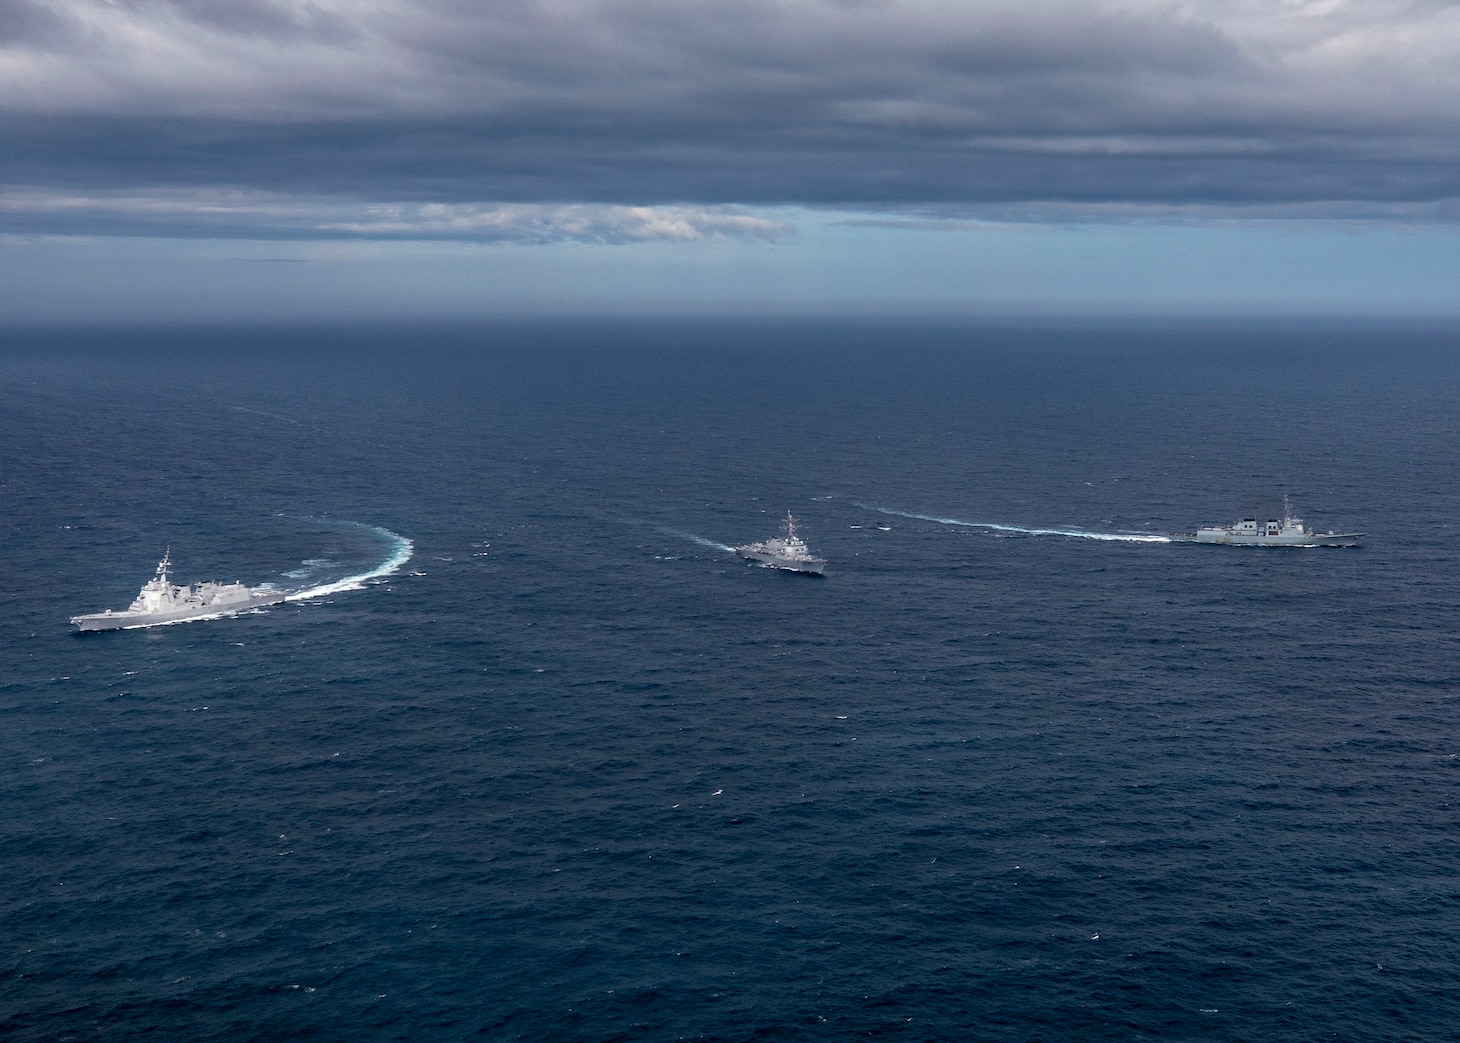 Se Jong Daewang class destroyer ROKS Yul Gog Yi I (DDG 992) (right) of the Republic of Korea Navy and Atago class destroyer JS Maya (DDG 179) (left) of the Japanese Maritime Self-Defense Force sail alongside Arleigh Burke-class guided-missile destroyer USS John Finn (DDG 113) (center) while conducting a trilateral ballistic missile defense exercise, July 16. John Finn is assigned to Commander, Task Force 71/Destroyer Squadron (DESRON) 15, the Navy’s largest forward-deployed DESRON and U.S. 7th Fleet’s principal surface force.